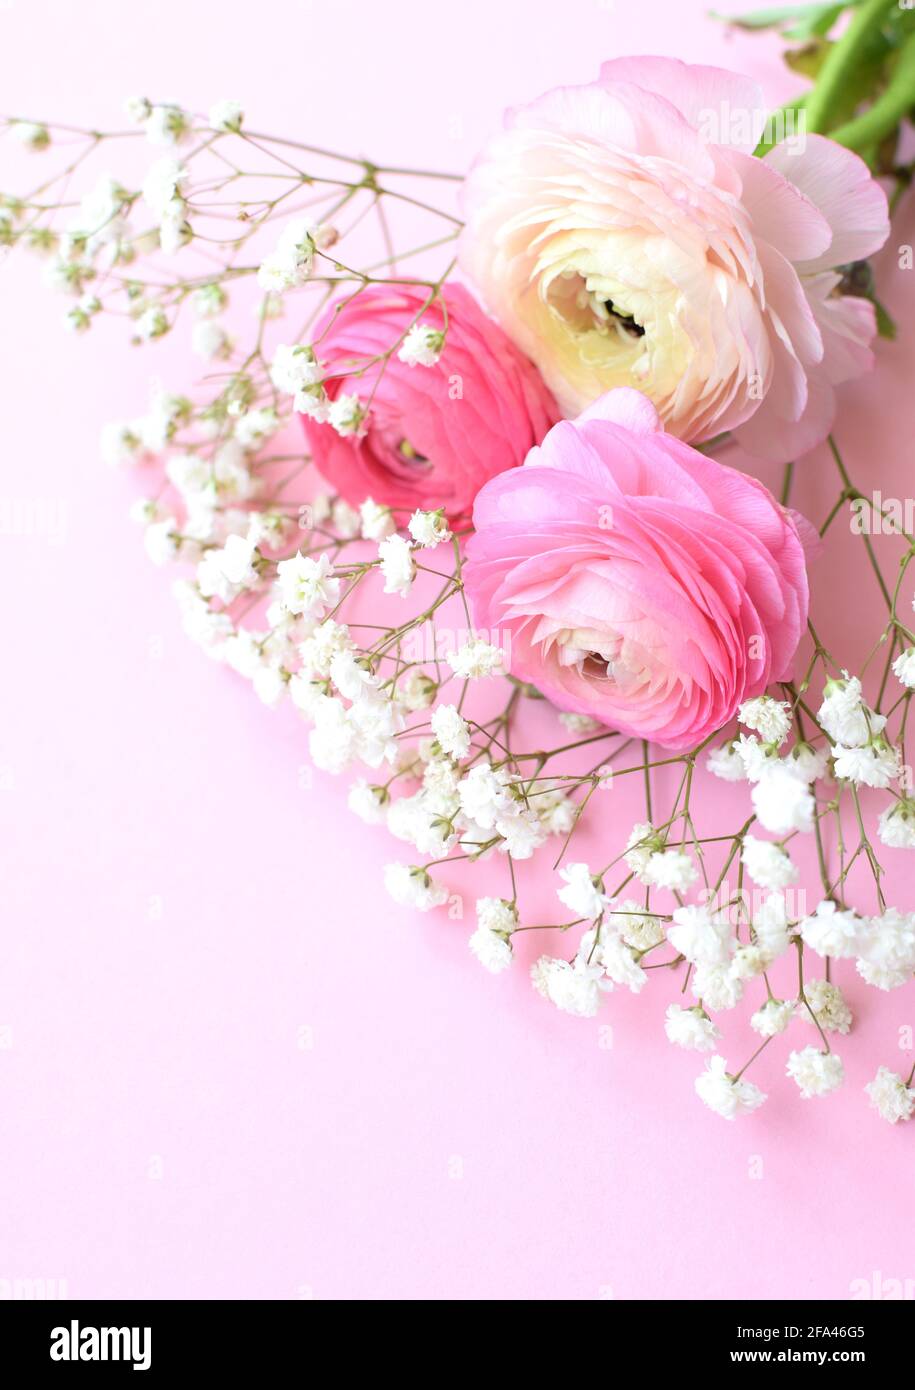 A beautiful bouquet of pink ranunculus (buttercups) with delicate white gypsophila flowers on a pink background. Stock Photo